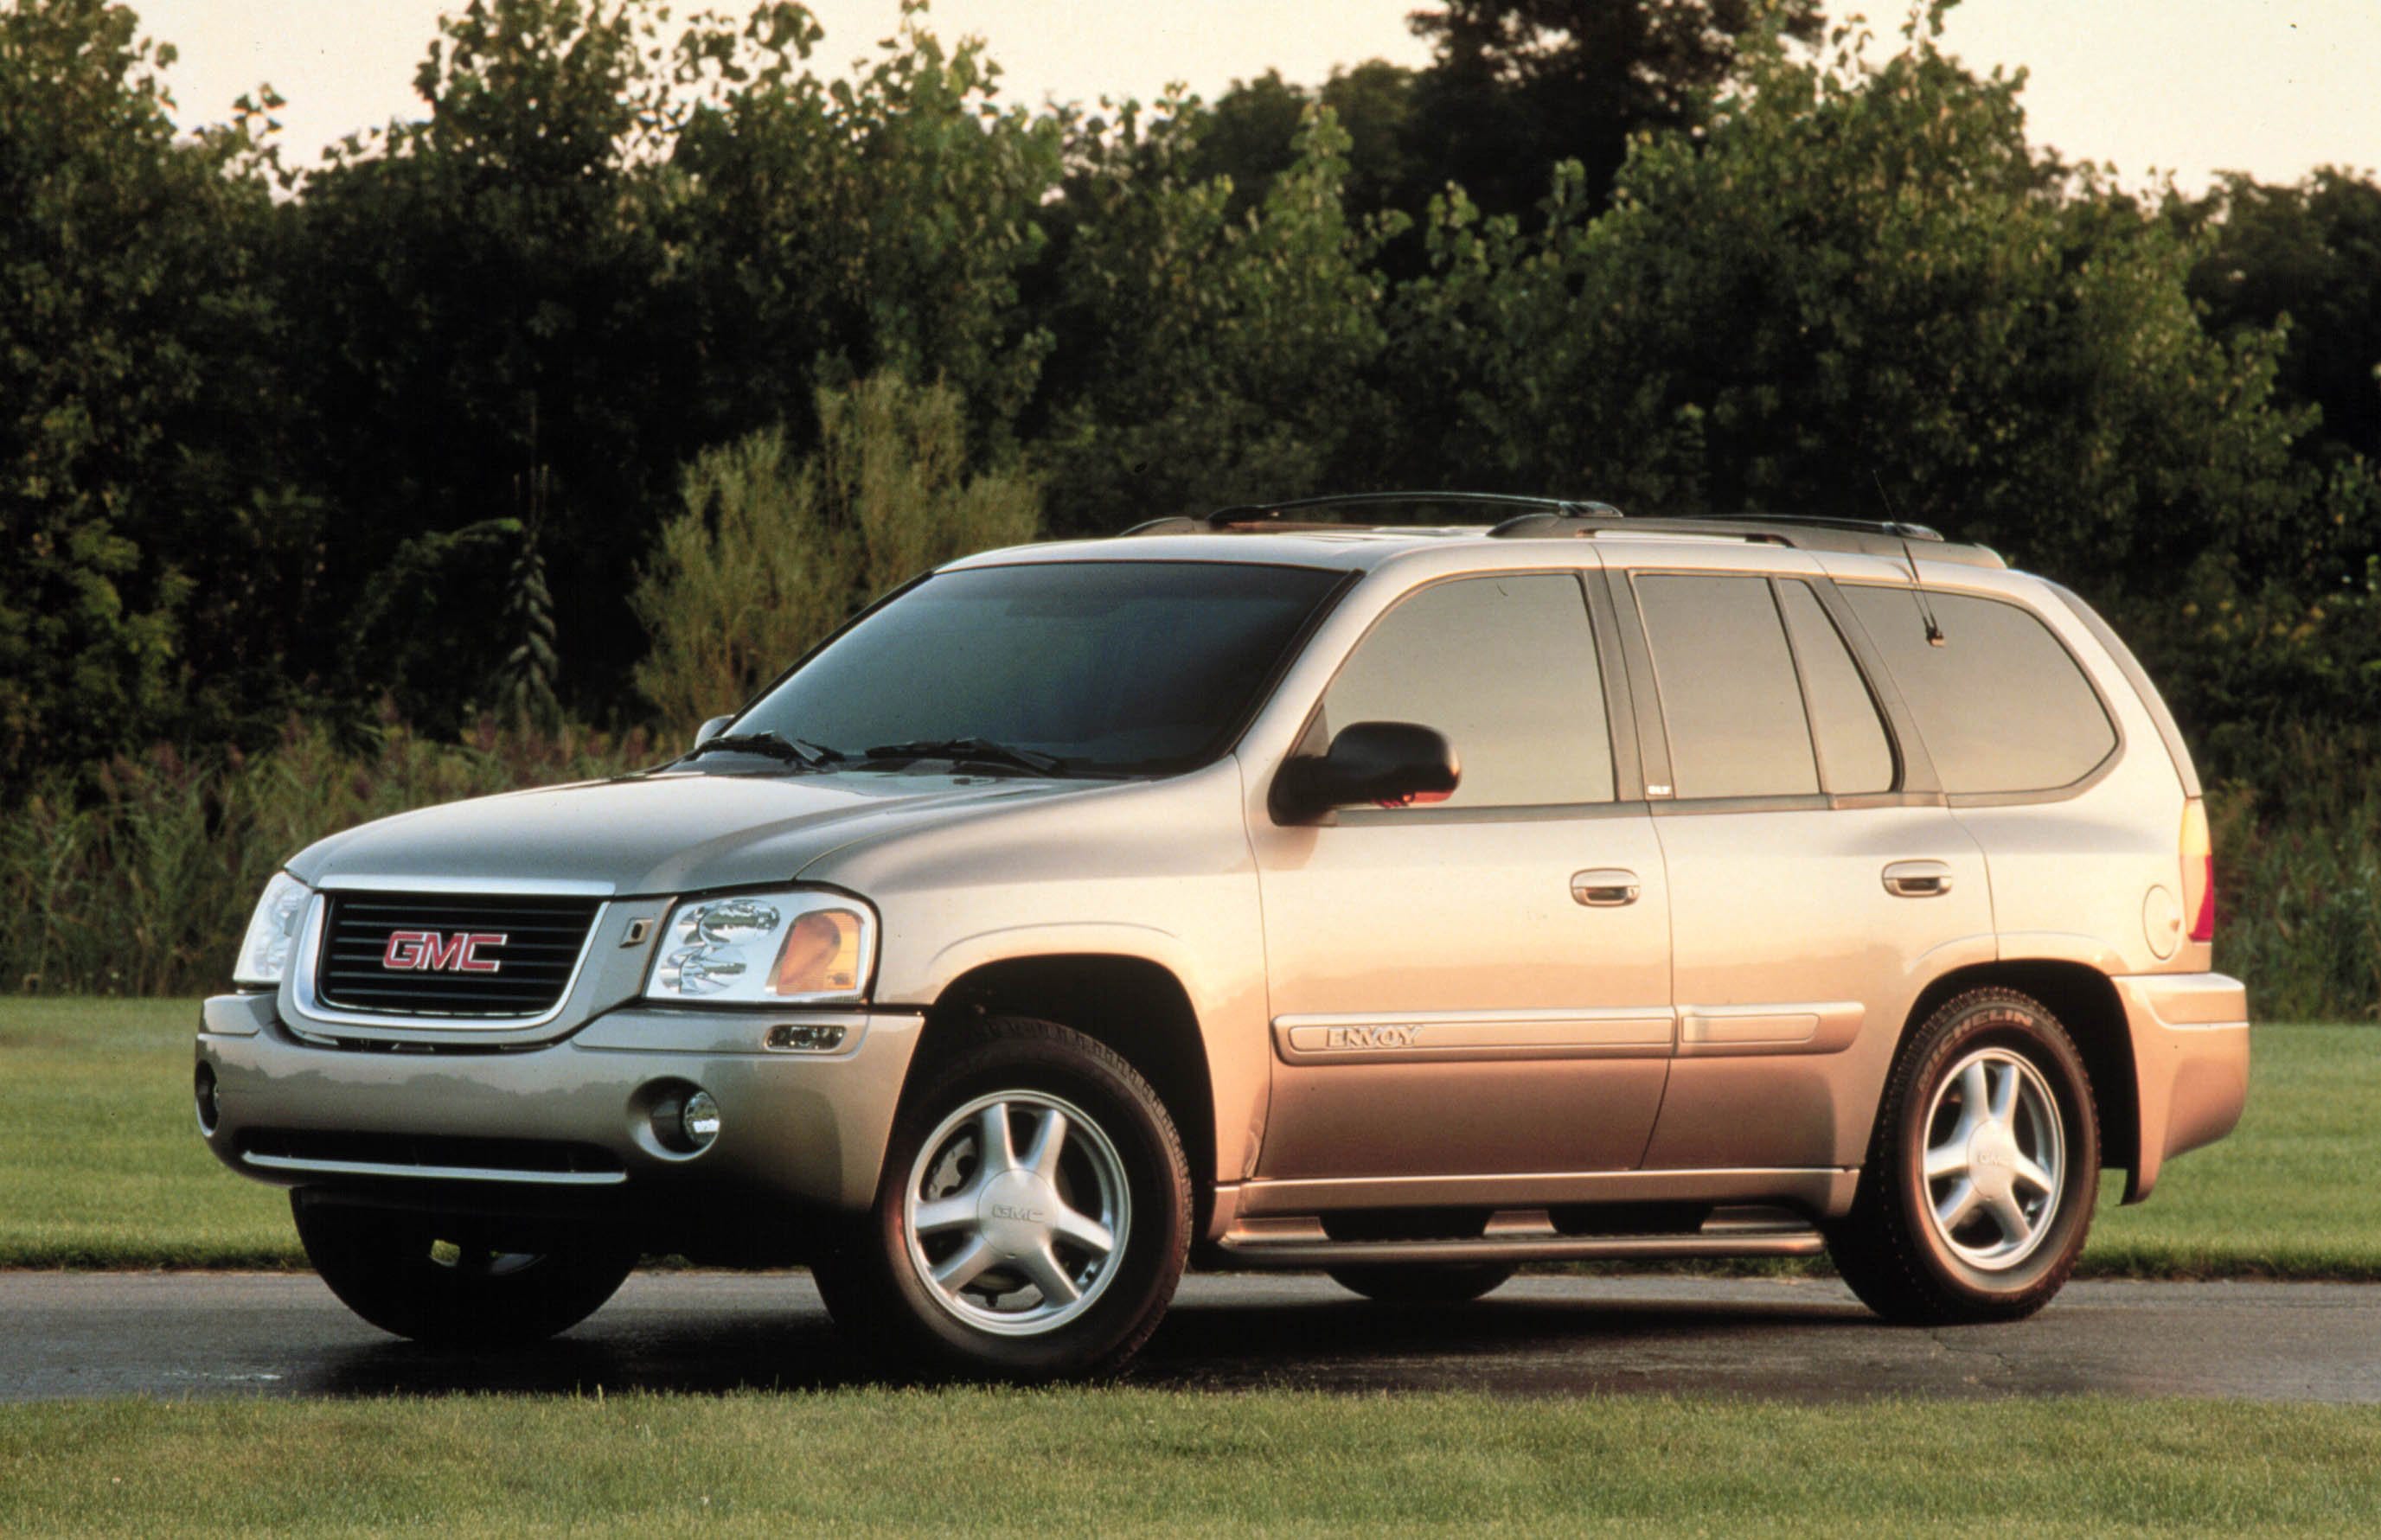 GMC Envoy trademark filing raises speculation SUV may be brought back